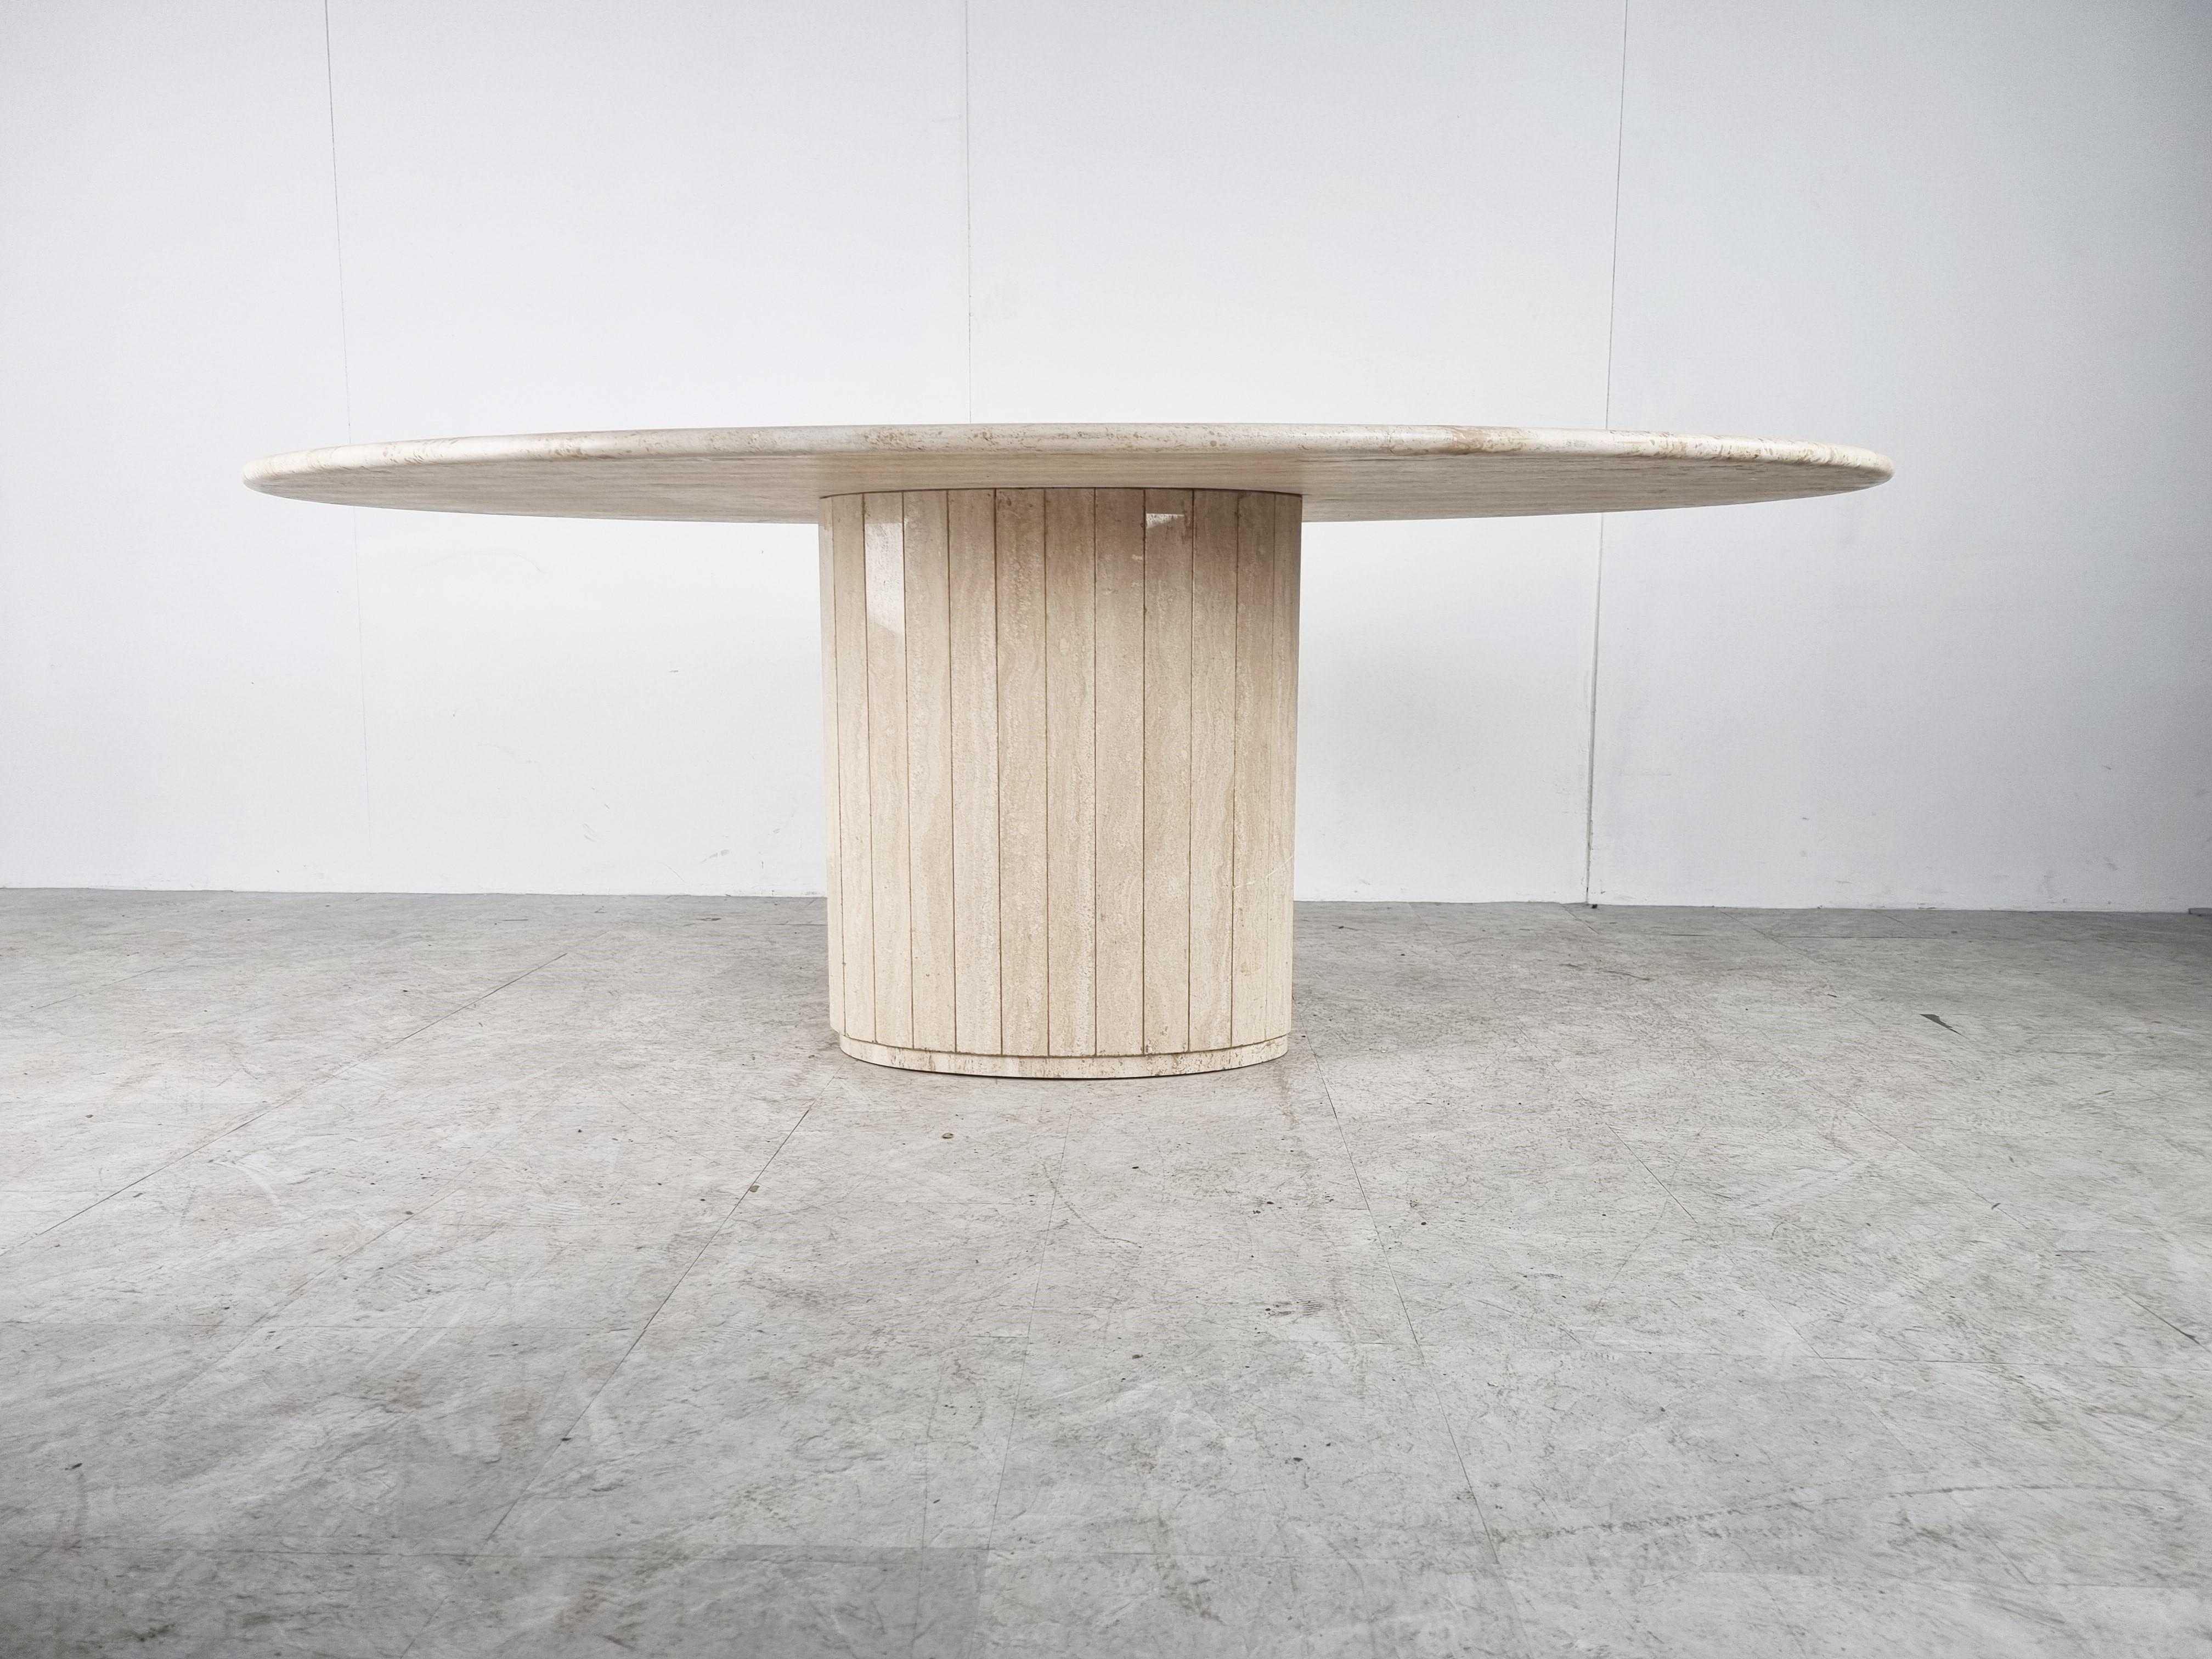 Elegant travertine dining table with a reeded central base. 

Beautiful coloured travertine with a stunning pattern.

Timeless and very beautiful table wich fits most interiors.

Good condition. 

1970s - Italy

Dimensions:
Height: